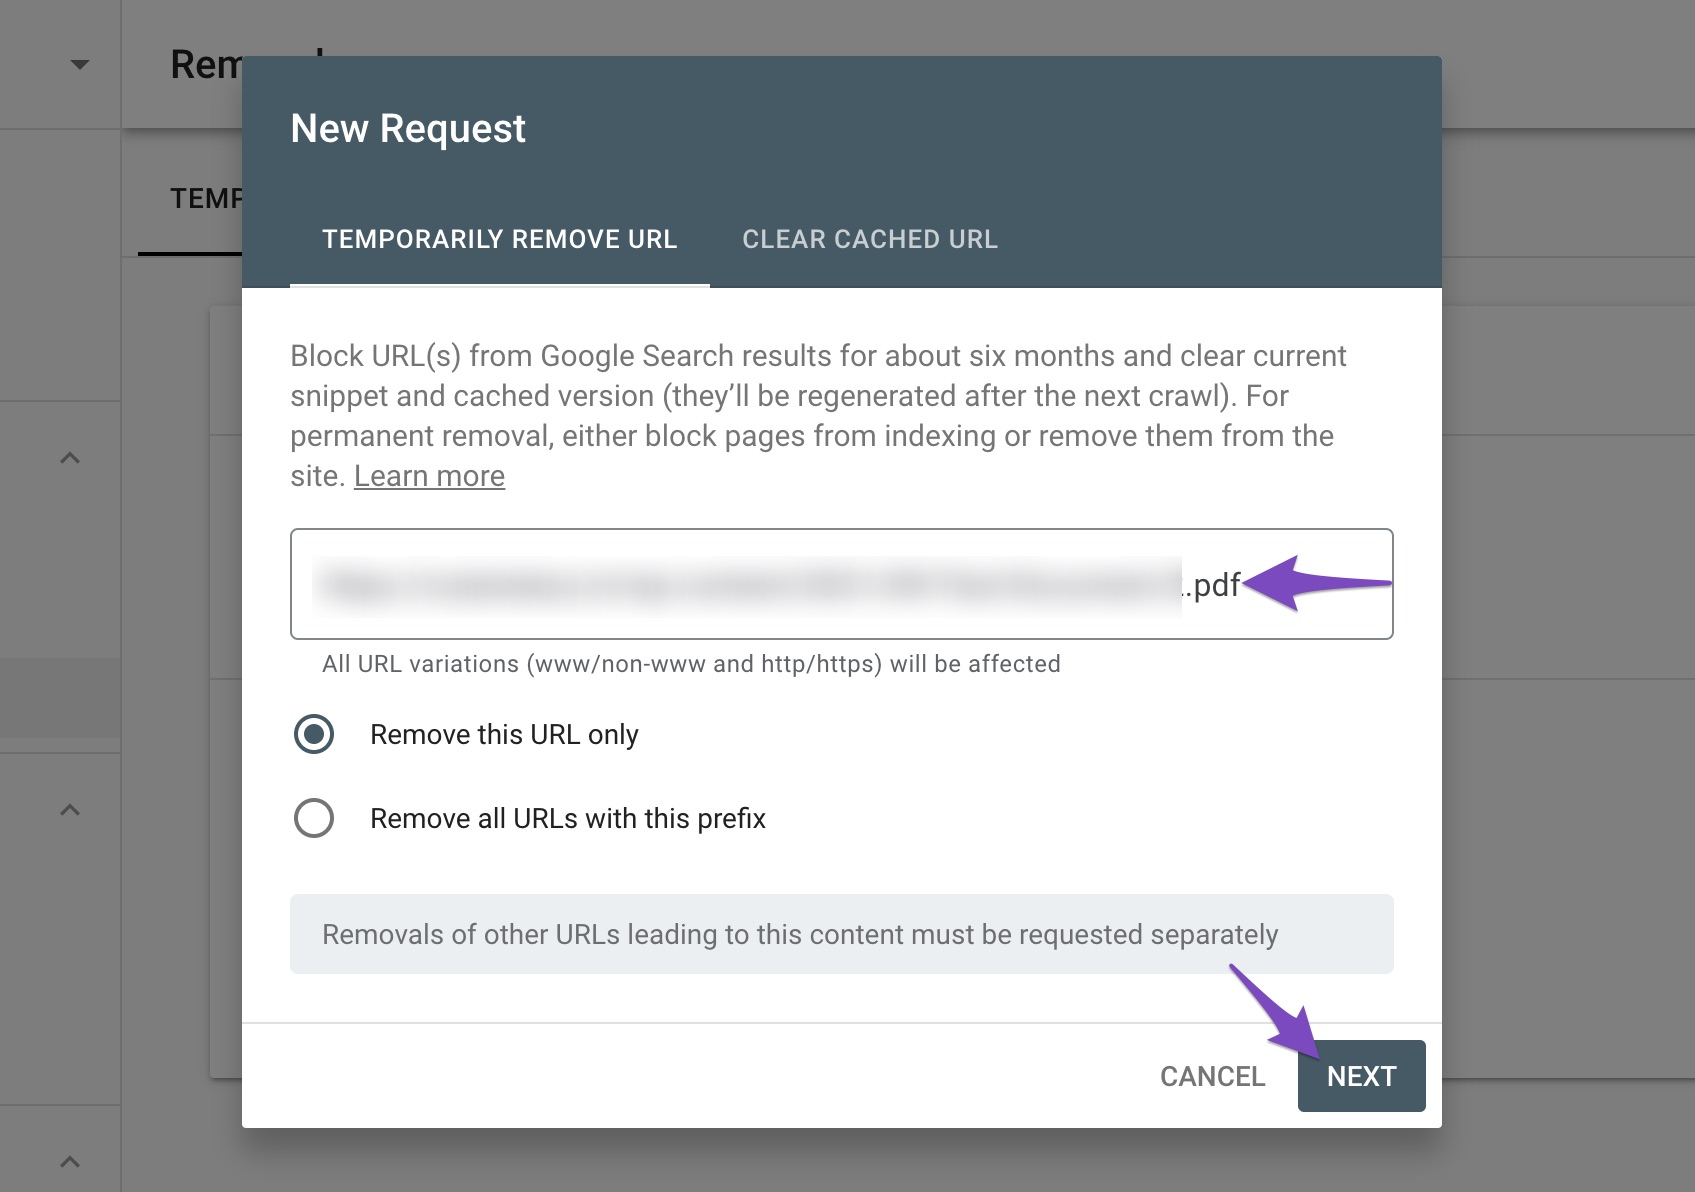 Submit new request for removal in Google Search Console